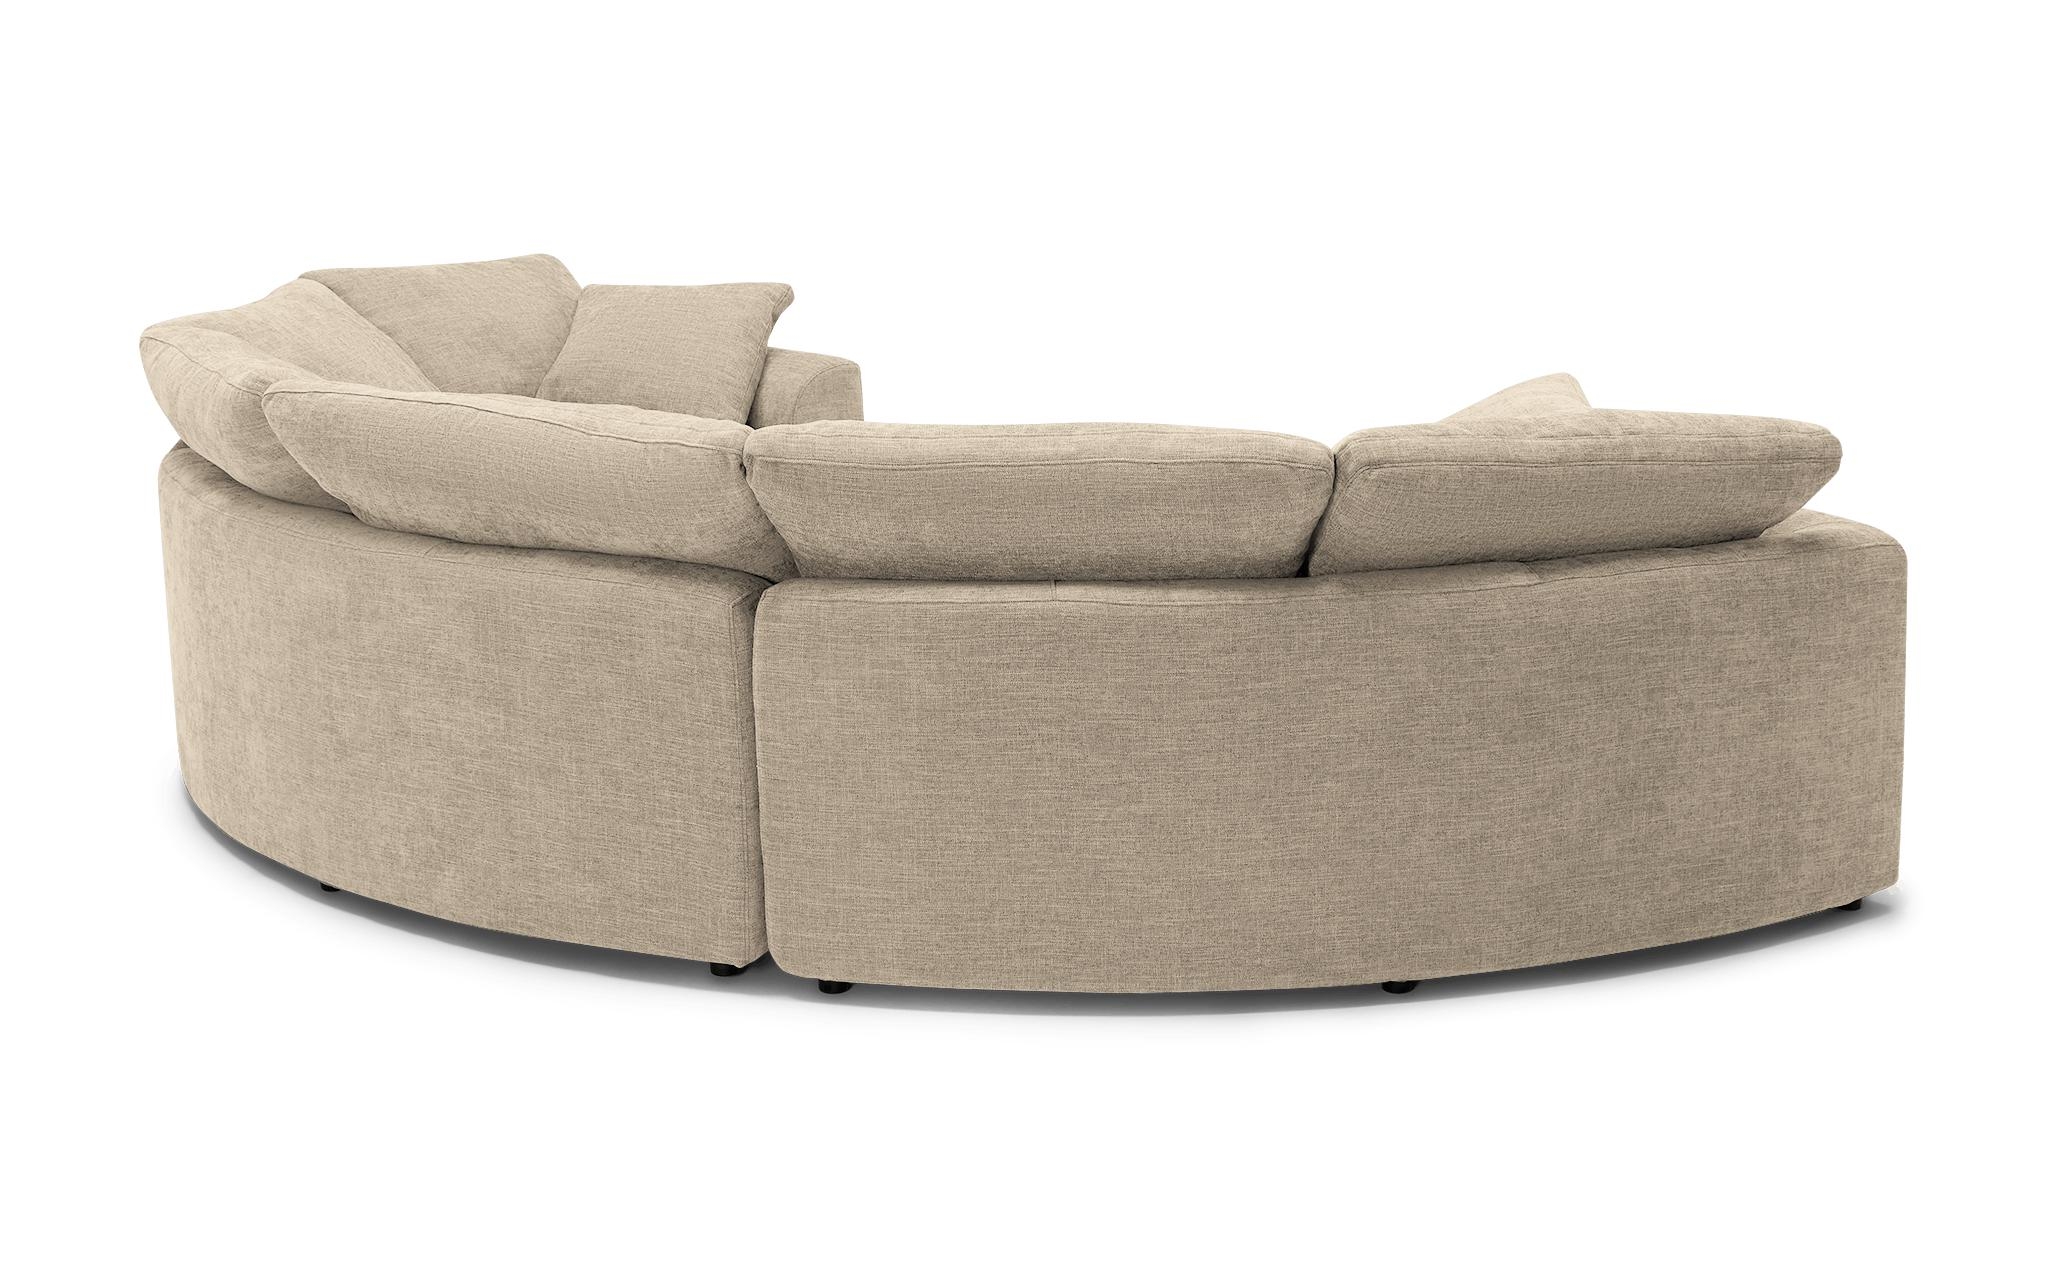 Beige/White Bryant Mid Century Modern Semicircle Sectional (3 Piece) - Cody Sandstone - Image 3